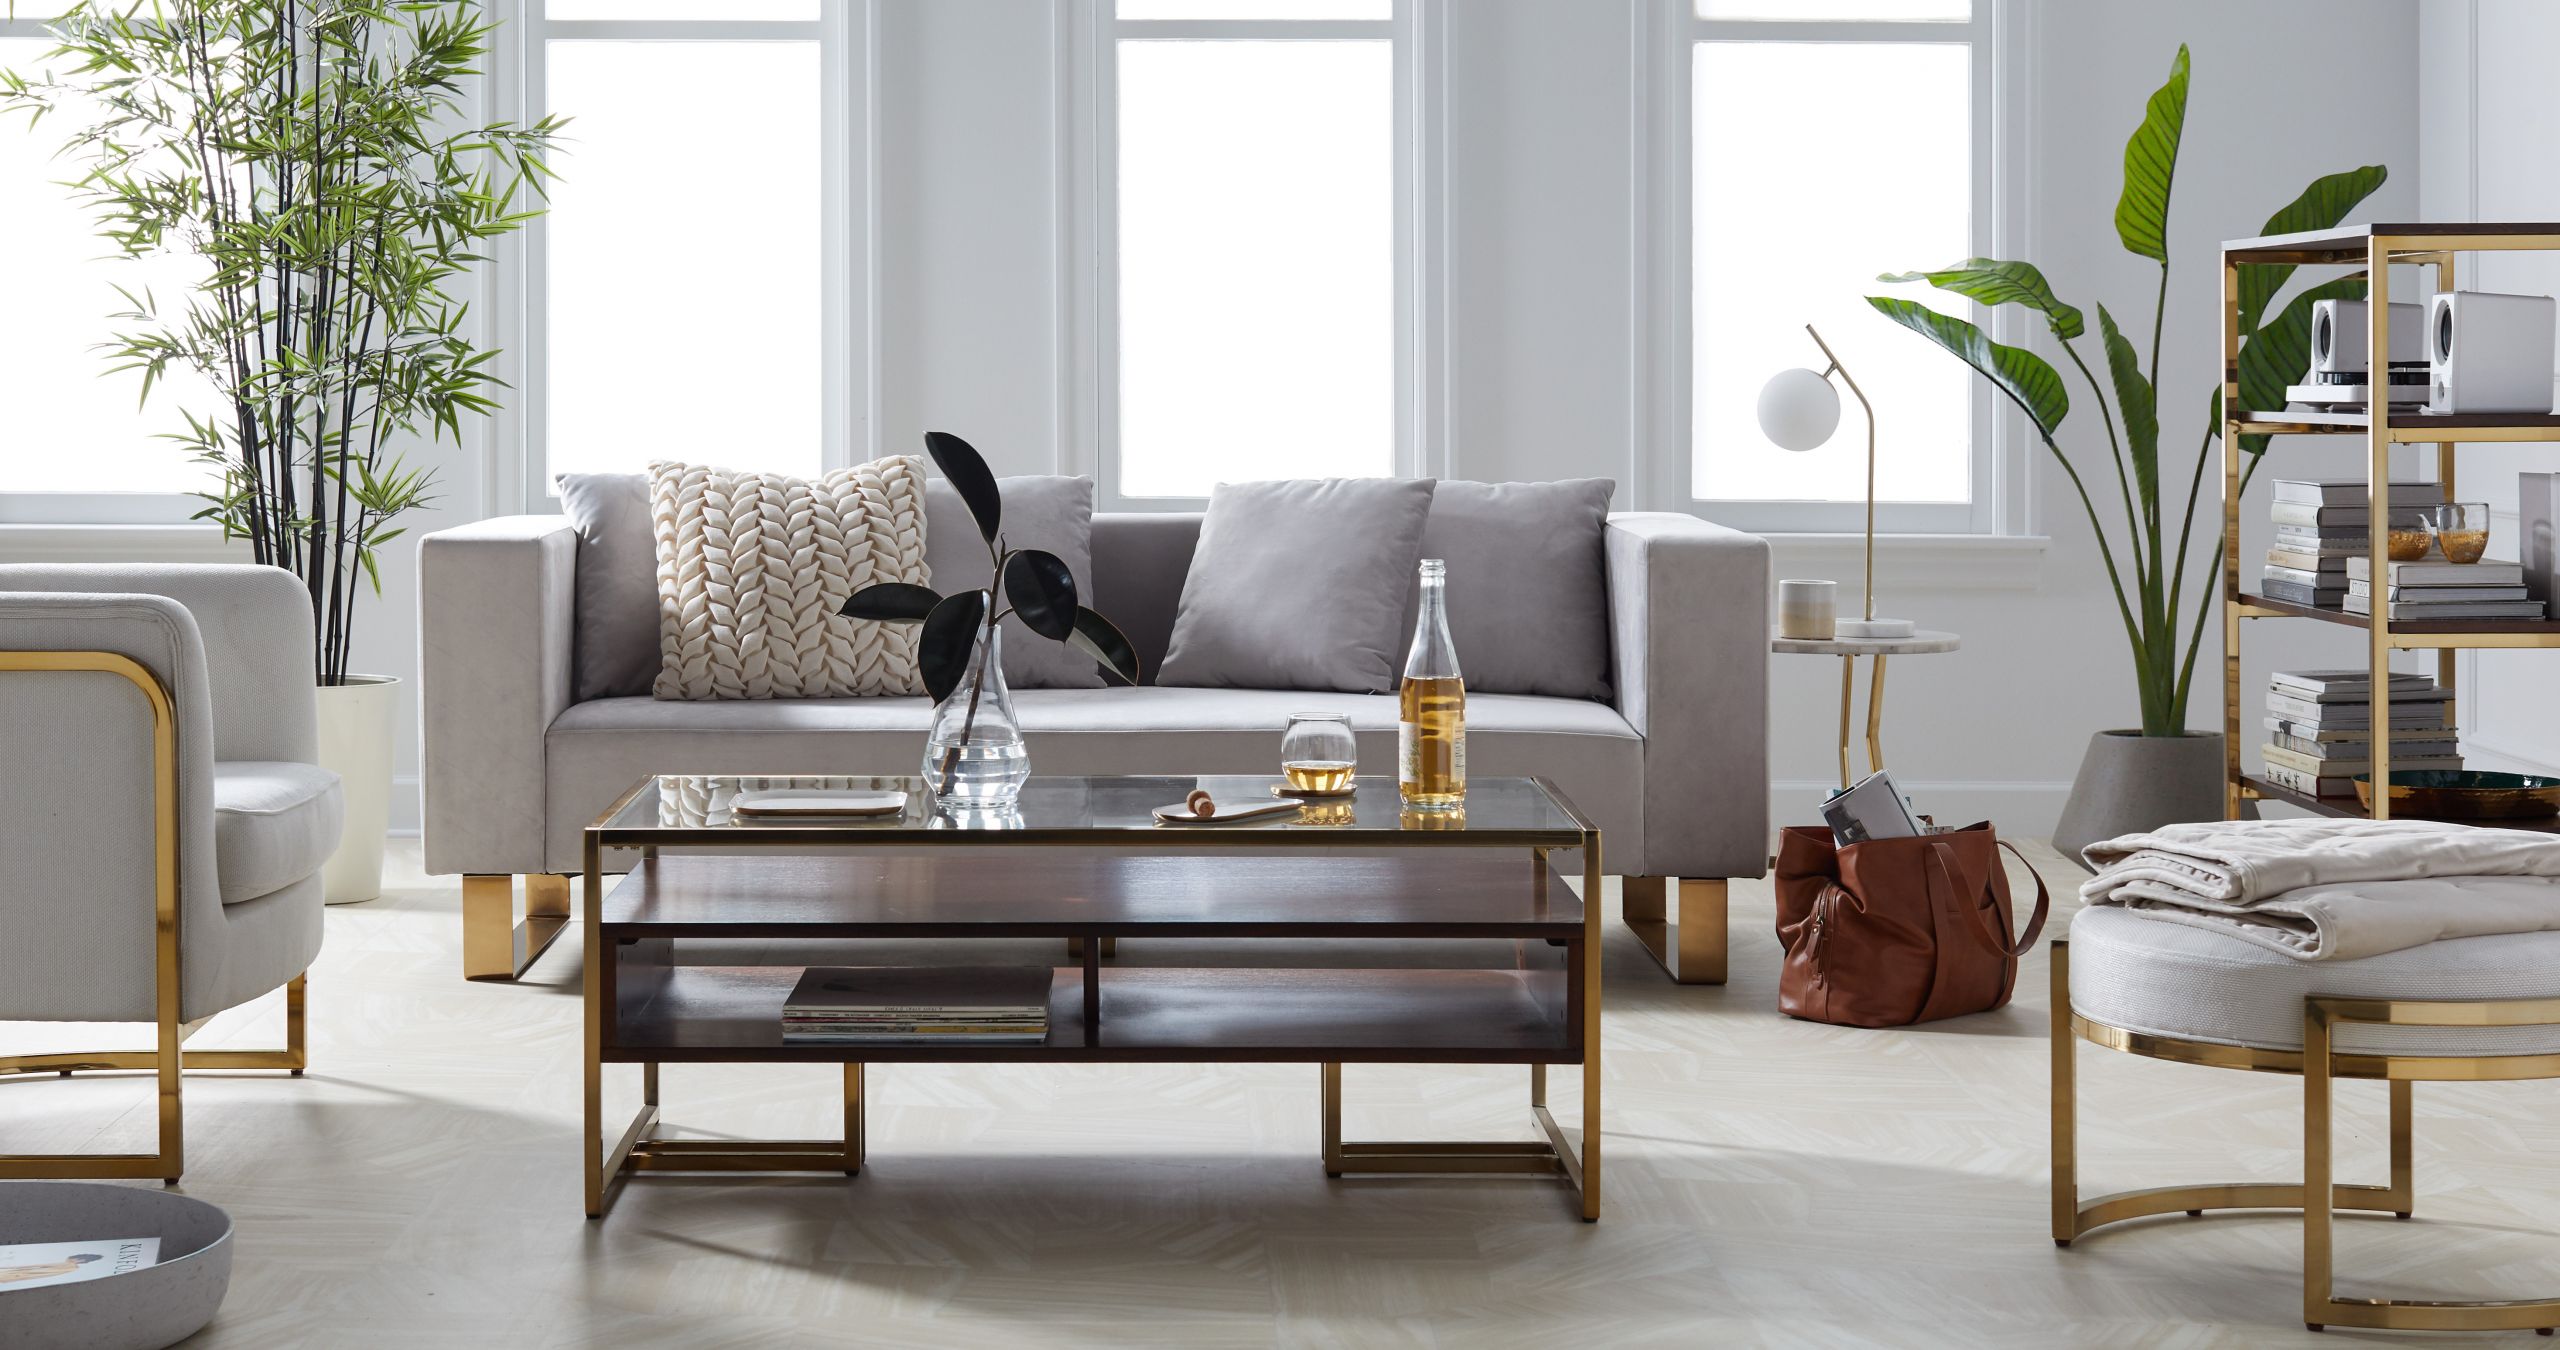 Modern Glam Living Room
 Walmart Just Dropped a Trendy New Home Collection That s